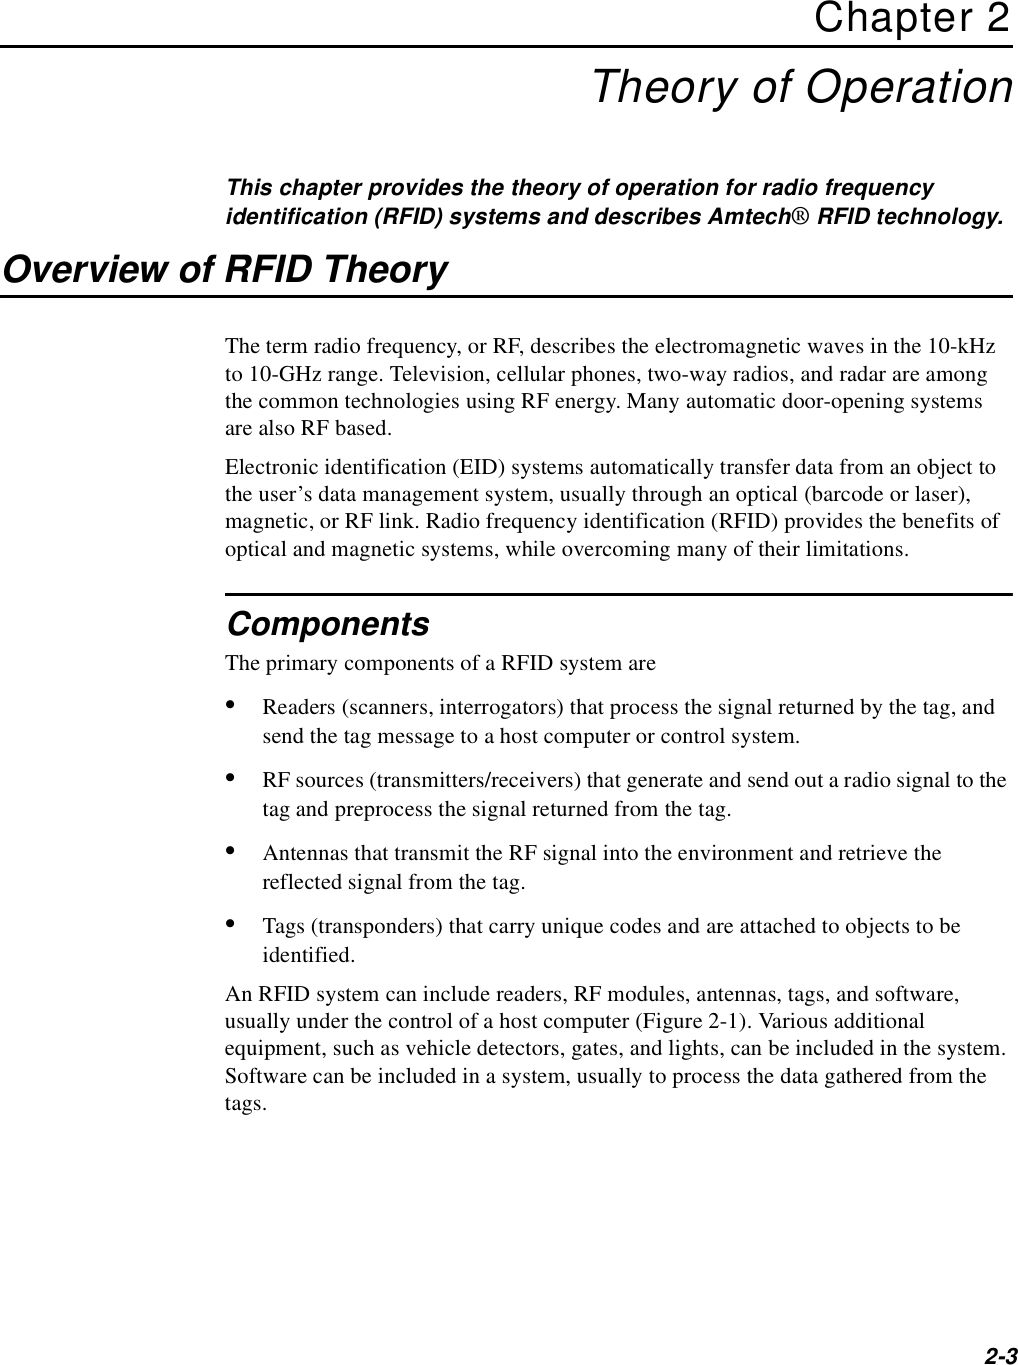 2-3Chapter 2Theory of OperationThis chapter provides the theory of operation for radio frequency identification (RFID) systems and describes Amtech® RFID technology.Overview of RFID TheoryThe term radio frequency, or RF, describes the electromagnetic waves in the 10-kHz to 10-GHz range. Television, cellular phones, two-way radios, and radar are among the common technologies using RF energy. Many automatic door-opening systems are also RF based.Electronic identification (EID) systems automatically transfer data from an object to the user’s data management system, usually through an optical (barcode or laser), magnetic, or RF link. Radio frequency identification (RFID) provides the benefits of optical and magnetic systems, while overcoming many of their limitations.ComponentsThe primary components of a RFID system are•Readers (scanners, interrogators) that process the signal returned by the tag, and send the tag message to a host computer or control system.•RF sources (transmitters/receivers) that generate and send out a radio signal to the tag and preprocess the signal returned from the tag.•Antennas that transmit the RF signal into the environment and retrieve the reflected signal from the tag.•Tags (transponders) that carry unique codes and are attached to objects to be identified.An RFID system can include readers, RF modules, antennas, tags, and software, usually under the control of a host computer (Figure 2-1). Various additional equipment, such as vehicle detectors, gates, and lights, can be included in the system. Software can be included in a system, usually to process the data gathered from the tags.